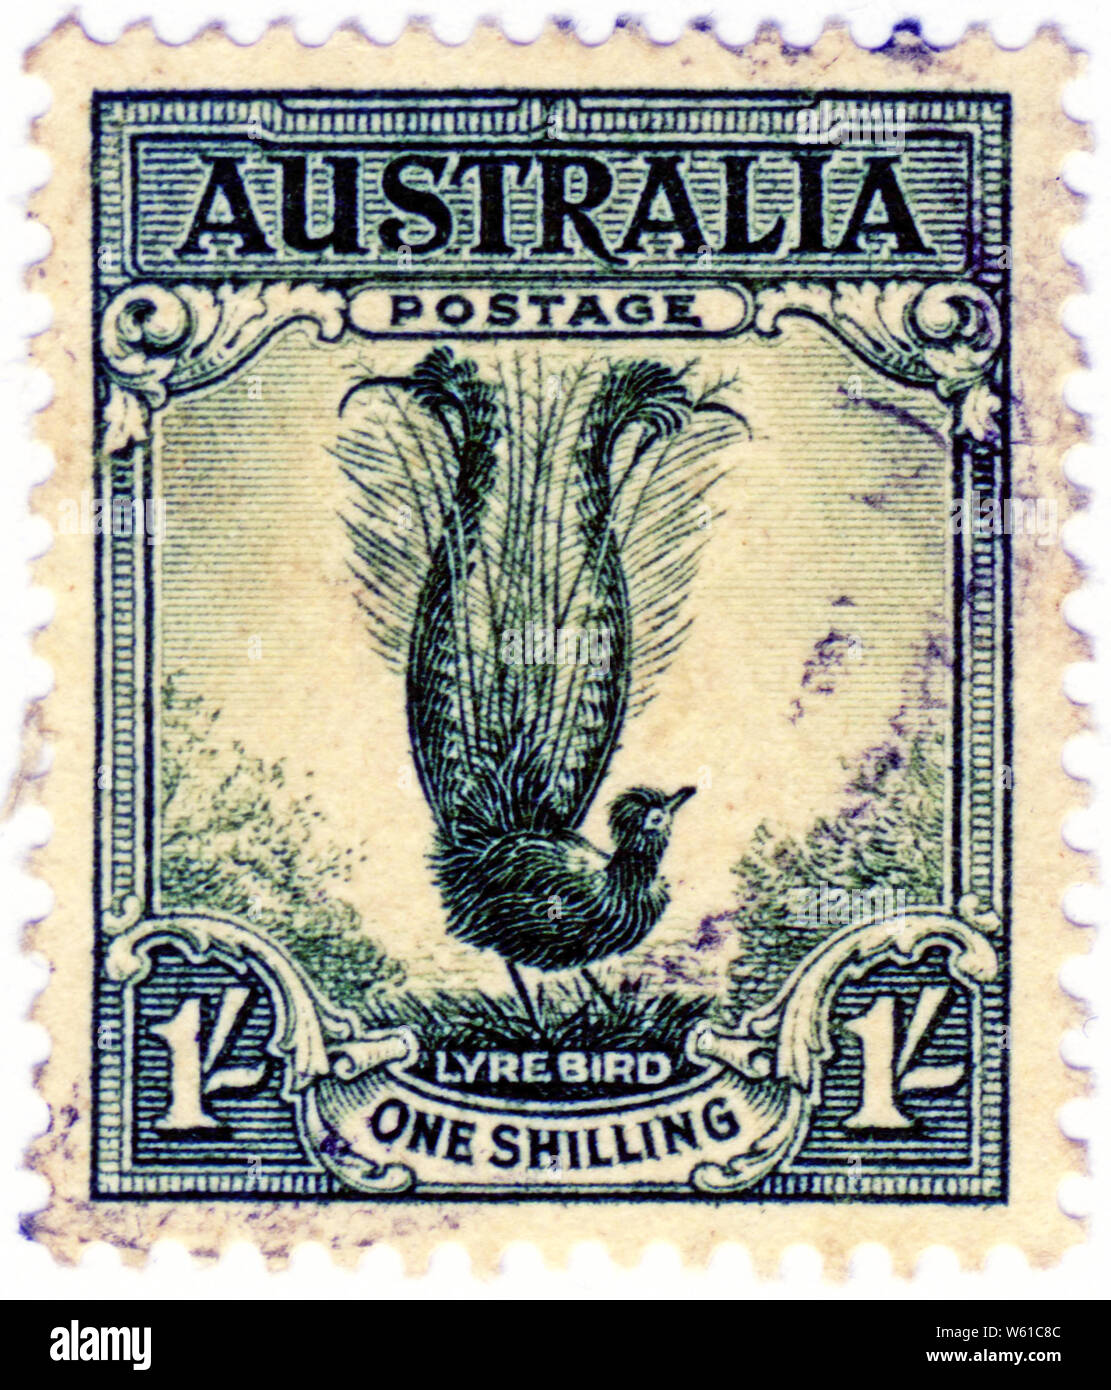 One shilling Australian stamp featuring the lyrebird, one of the iconic birds in the Australian bush Stock Photo